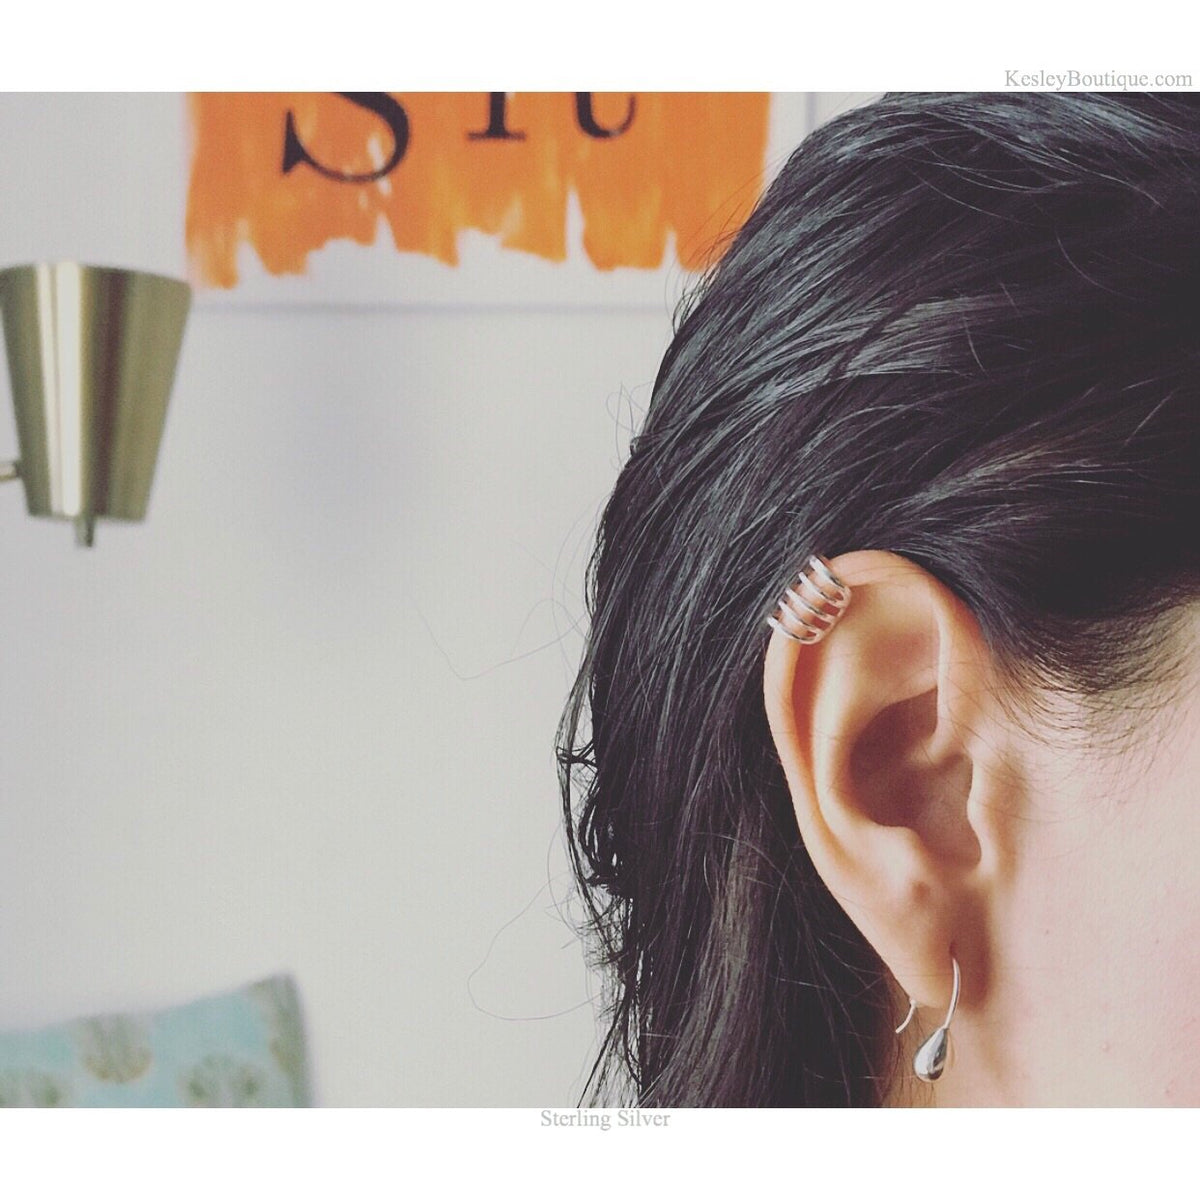 Ear Crawler in sterling silver by Kesley Boutique